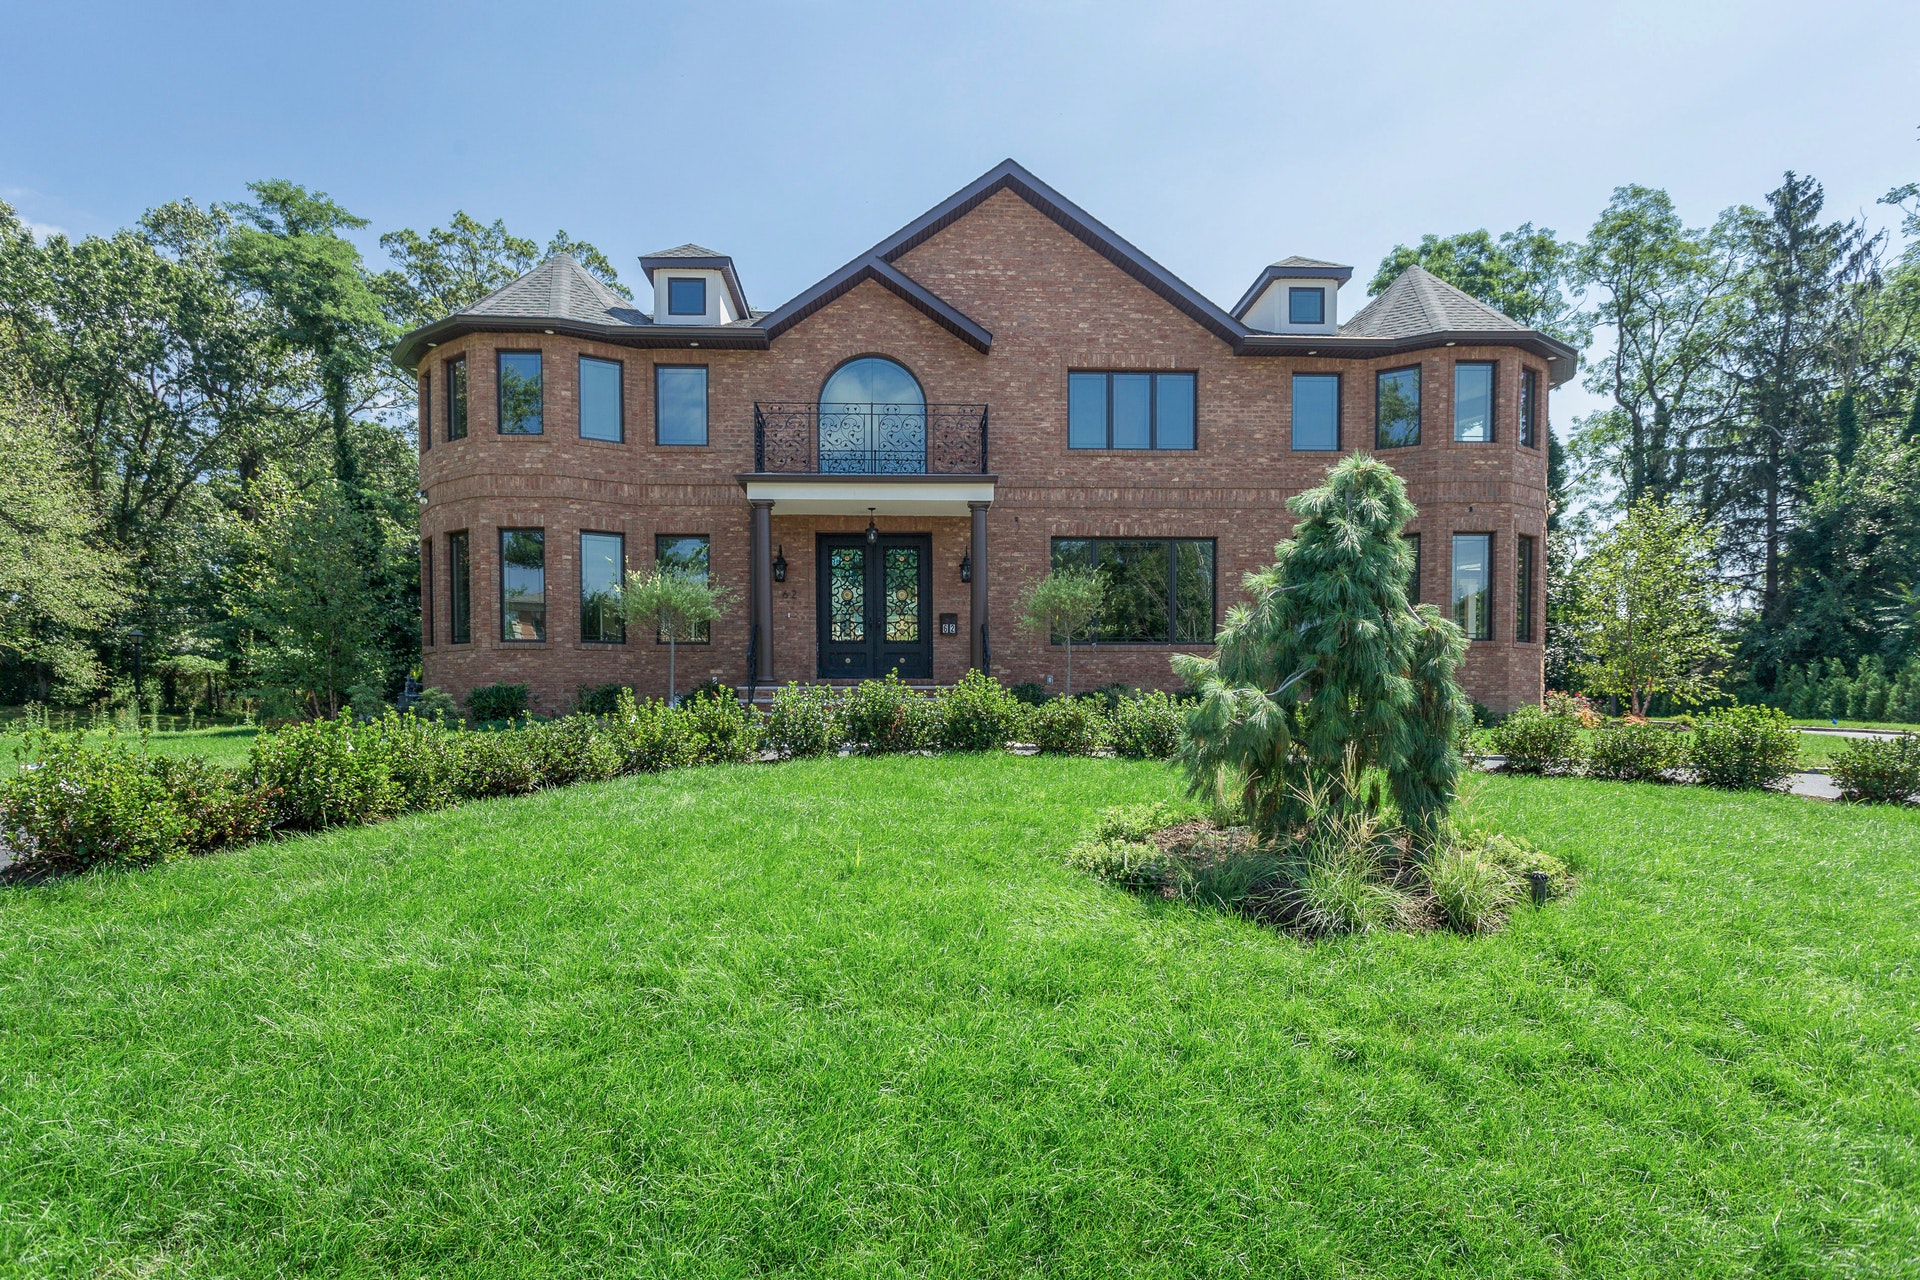 Brand New Brick Colonial Overlooking the rolling fairways of Wheatley Hills golf course